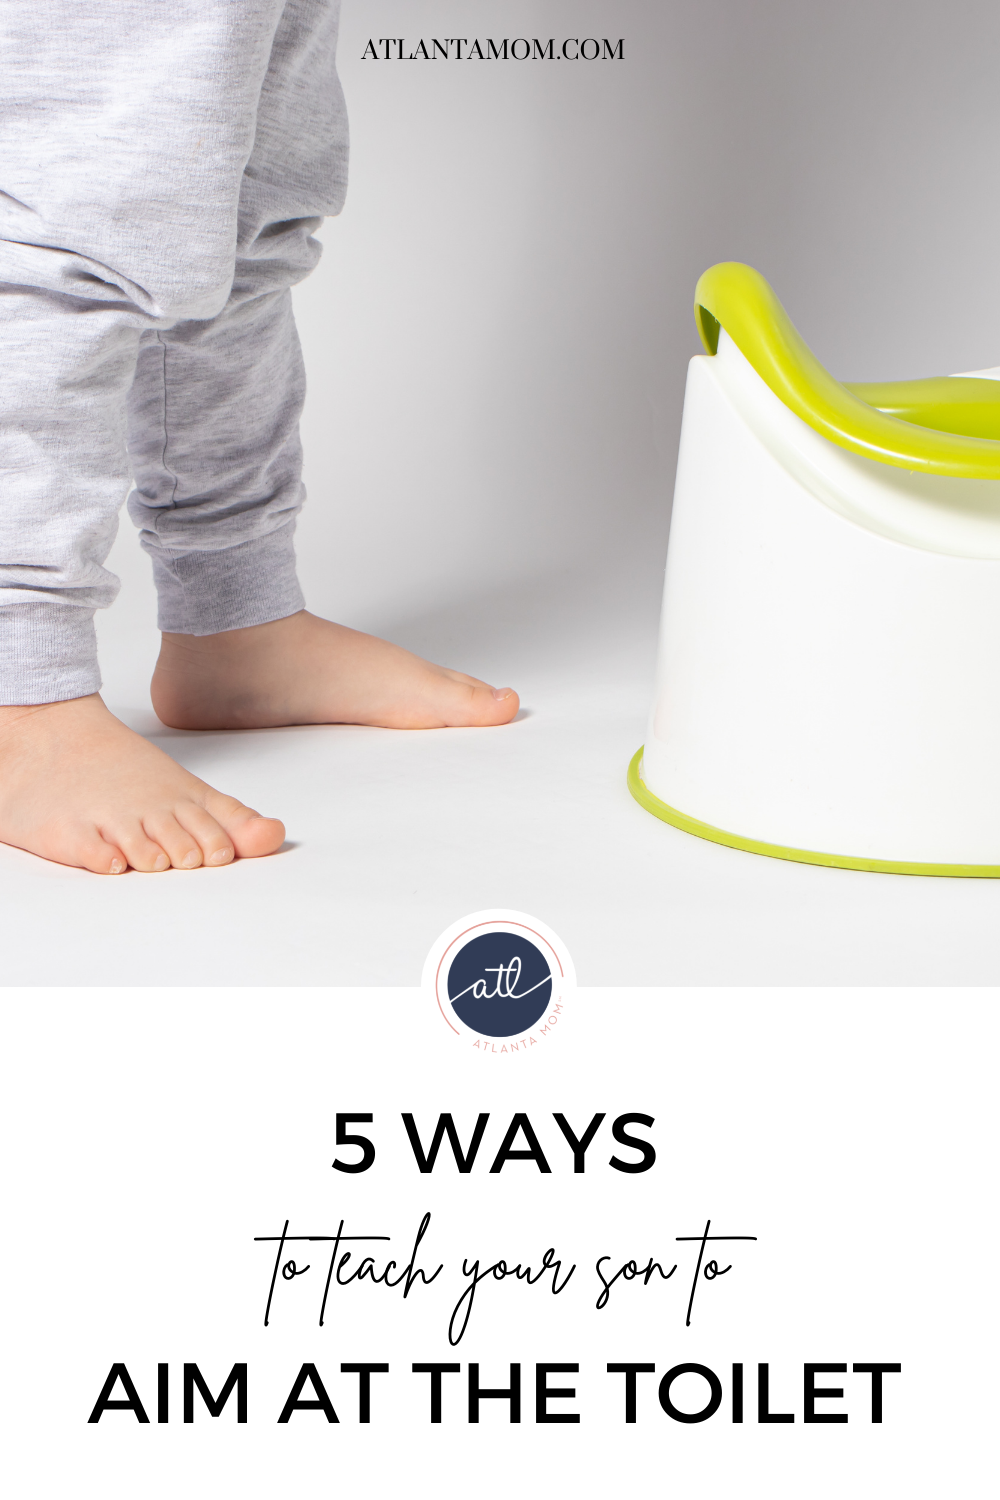 5 ways to teach your son to aim at the toilet